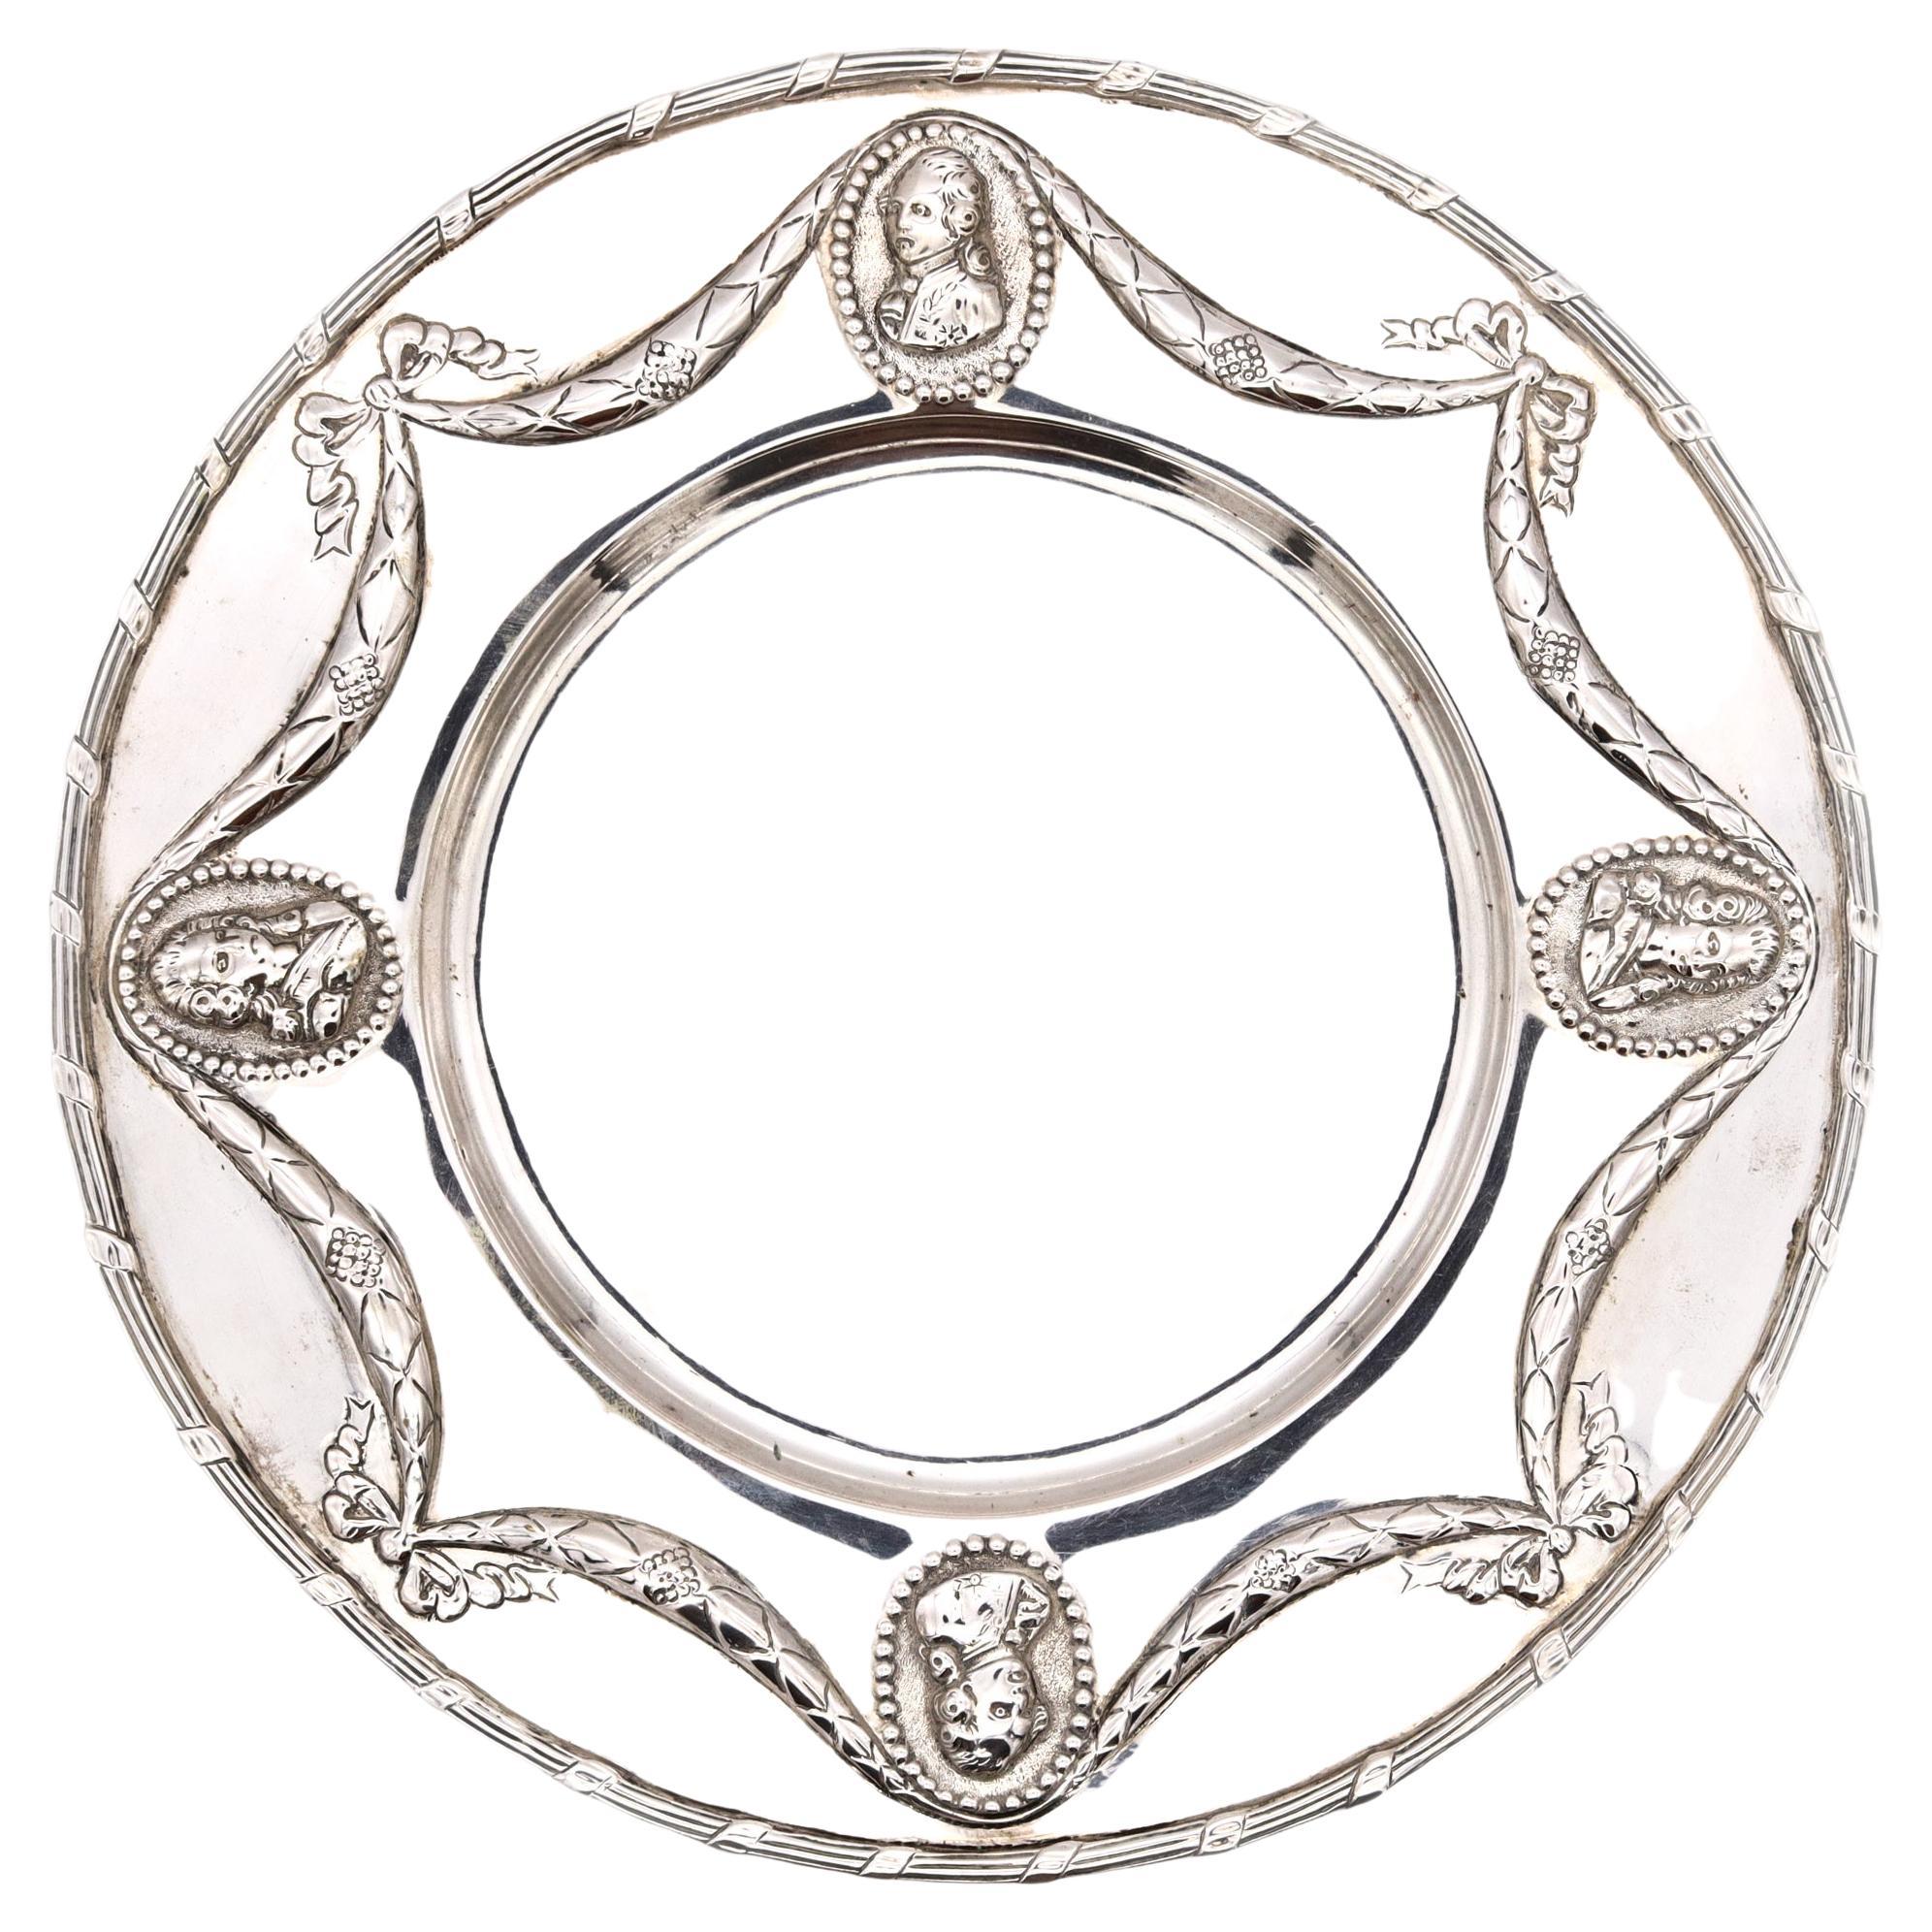 Germany Hanau 1820 Neoclassical Decorative Dish Plate in Solid Sterling Silver For Sale